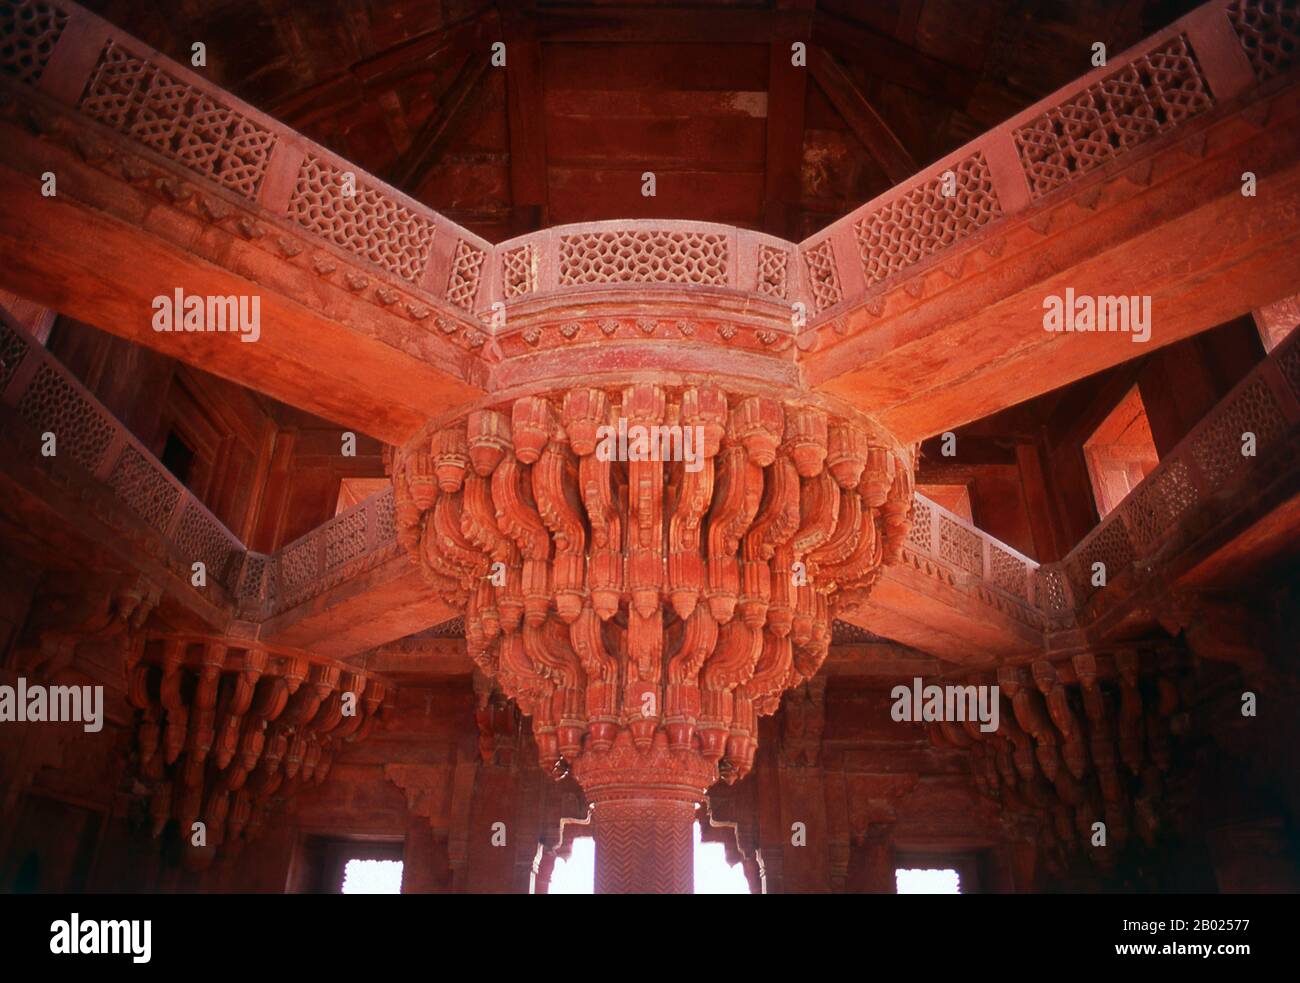 The Diwan-i-Khas, or Hall of Private Audience, is a plain square building with four chhatris on the roof. It is famous for its central pillar, which has a square base and an octagonal shaft, both carved with bands of geometric and floral designs, further its thirty-six serpentine brackets support a circular platform for the Mughal emperor Akbar, which is connected to each corner of the building on the first floor, by four stone walkways. It is here that Akbar had representatives of different religions discuss their faiths and gave private audience.  Fatehpur Sikri (the City of Victory) was bui Stock Photo